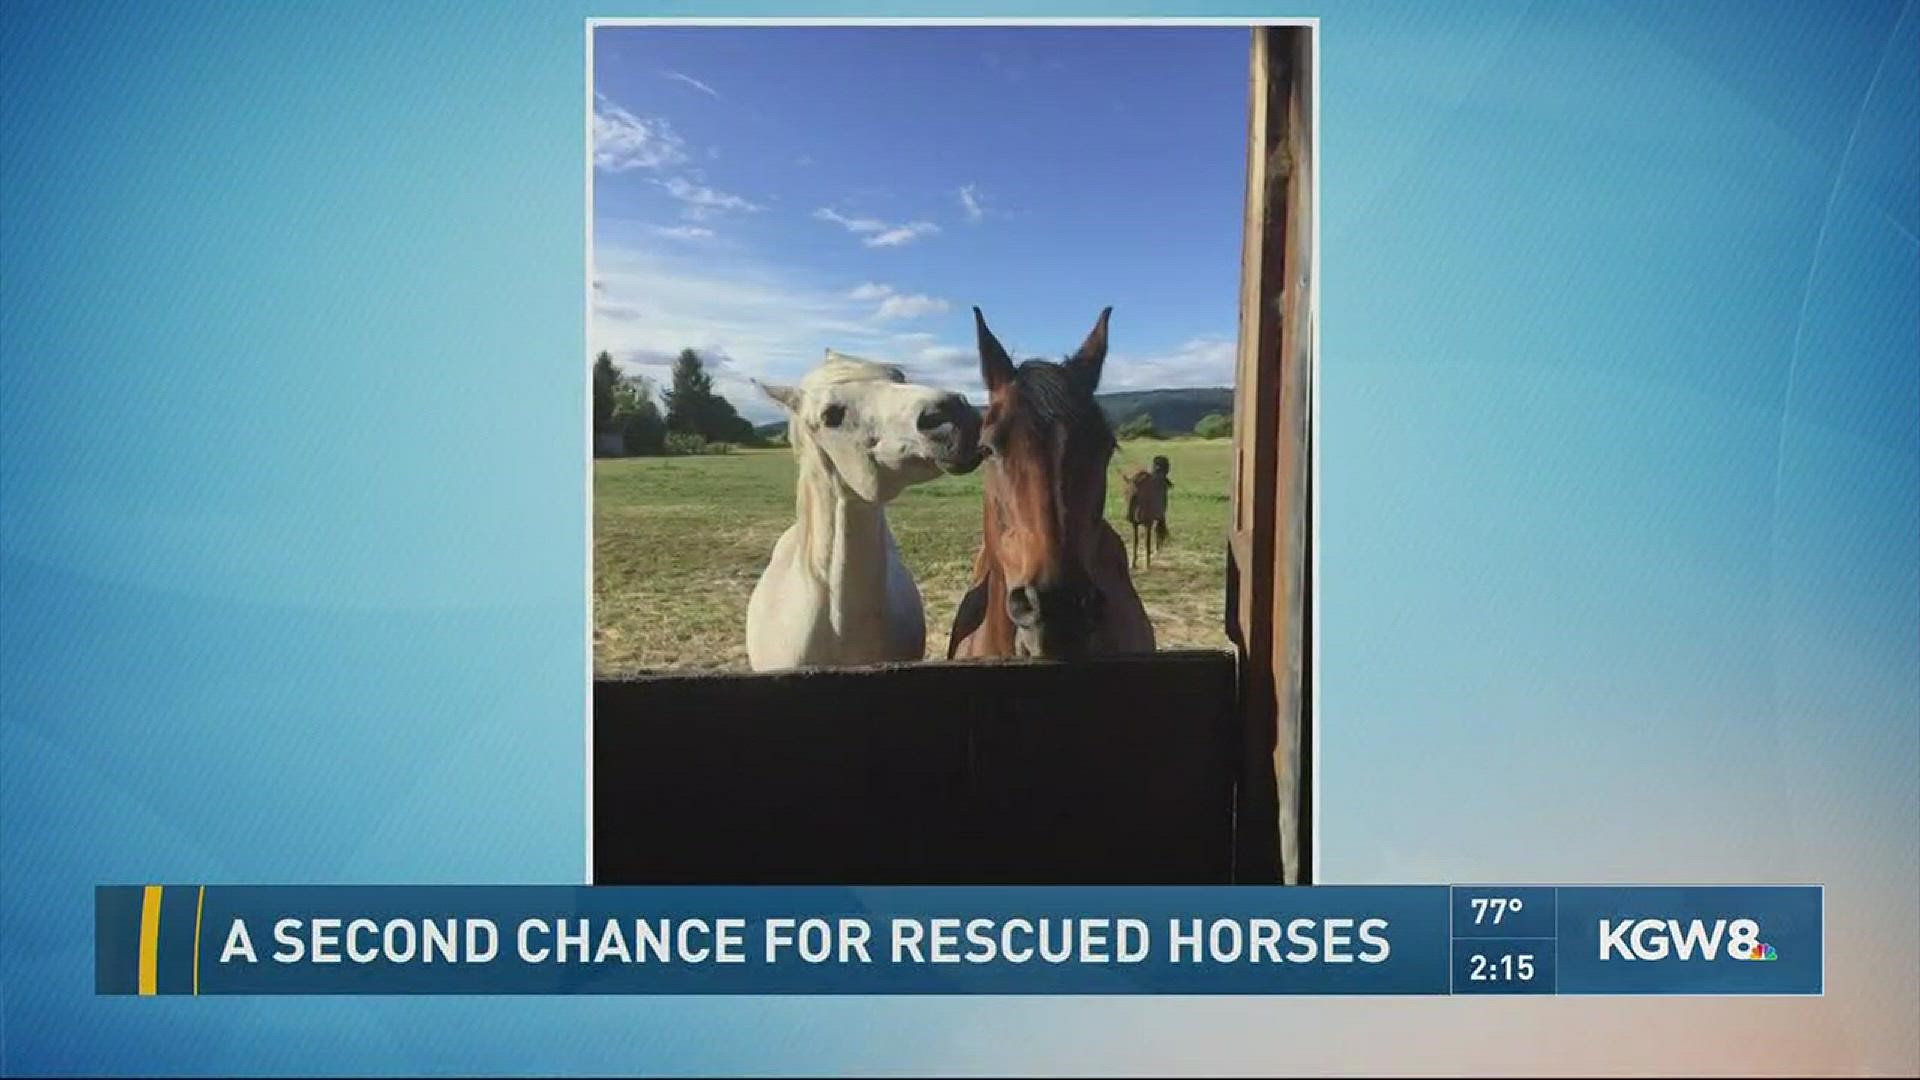 A second chance for rescued horses